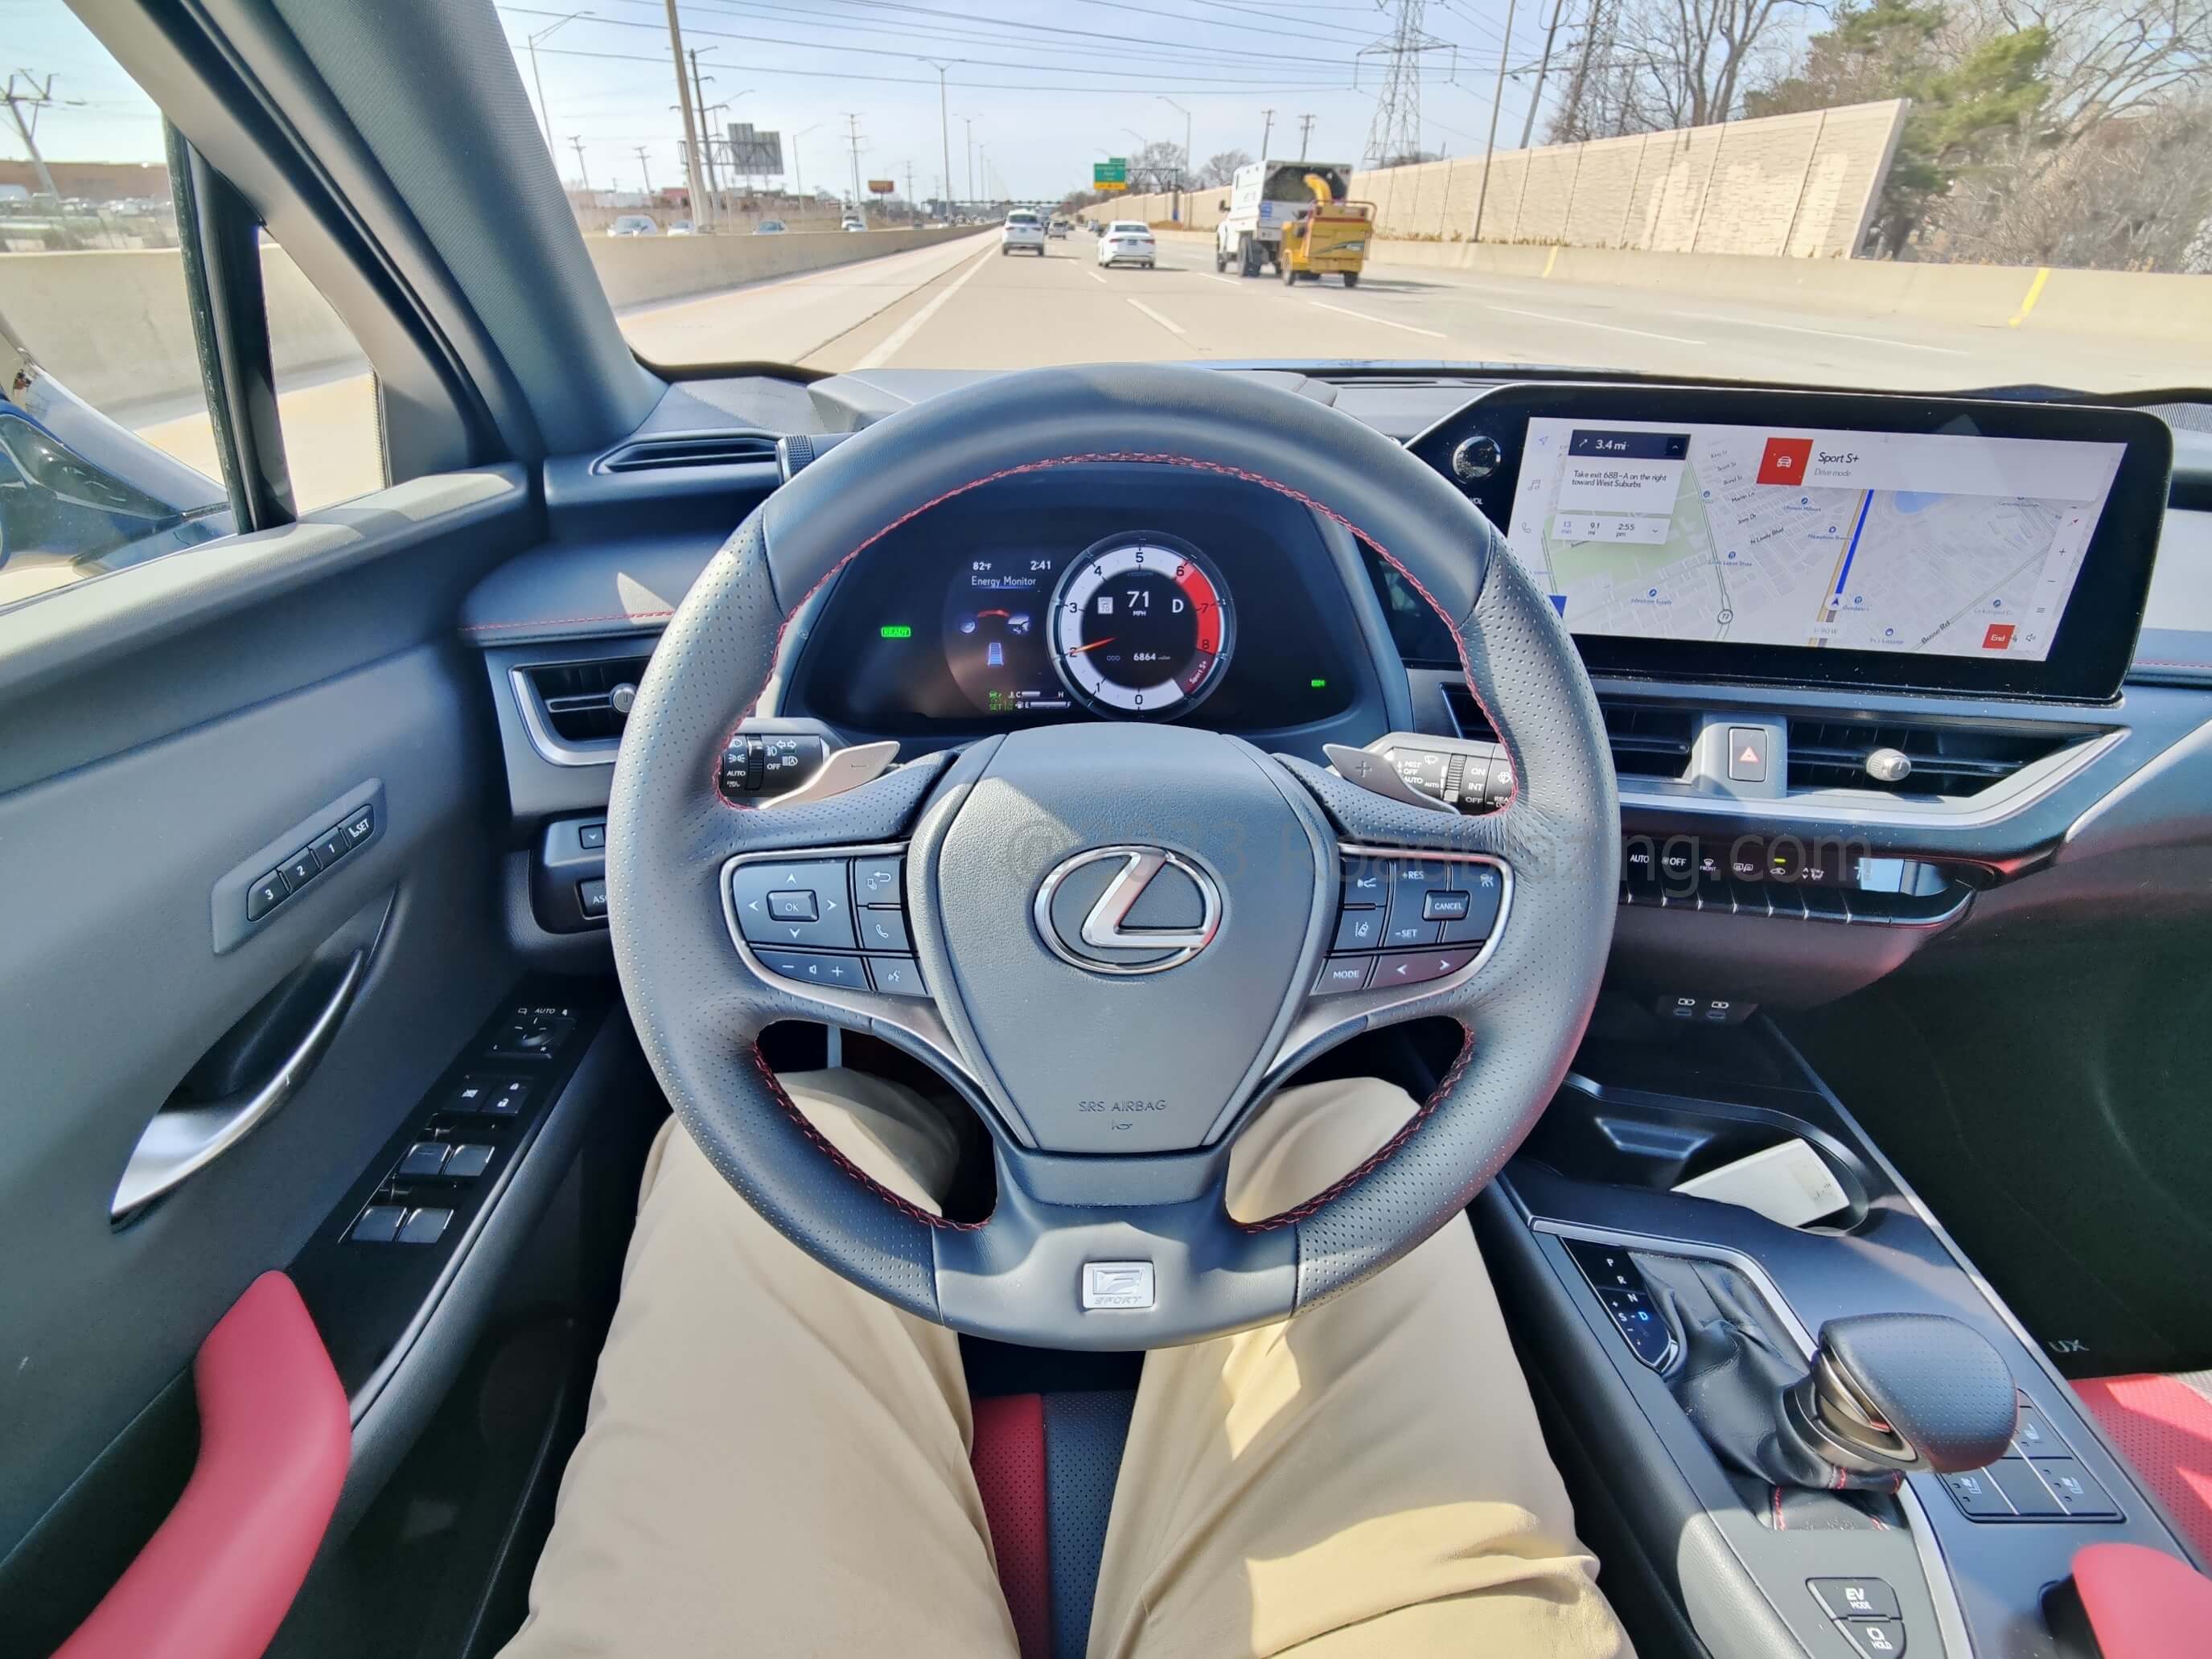 2023 Lexus UX 250 AWD F-Sport: Sport Plus mode indicated in the electric sliding gauges for enhanced throttle response and chassis tautness